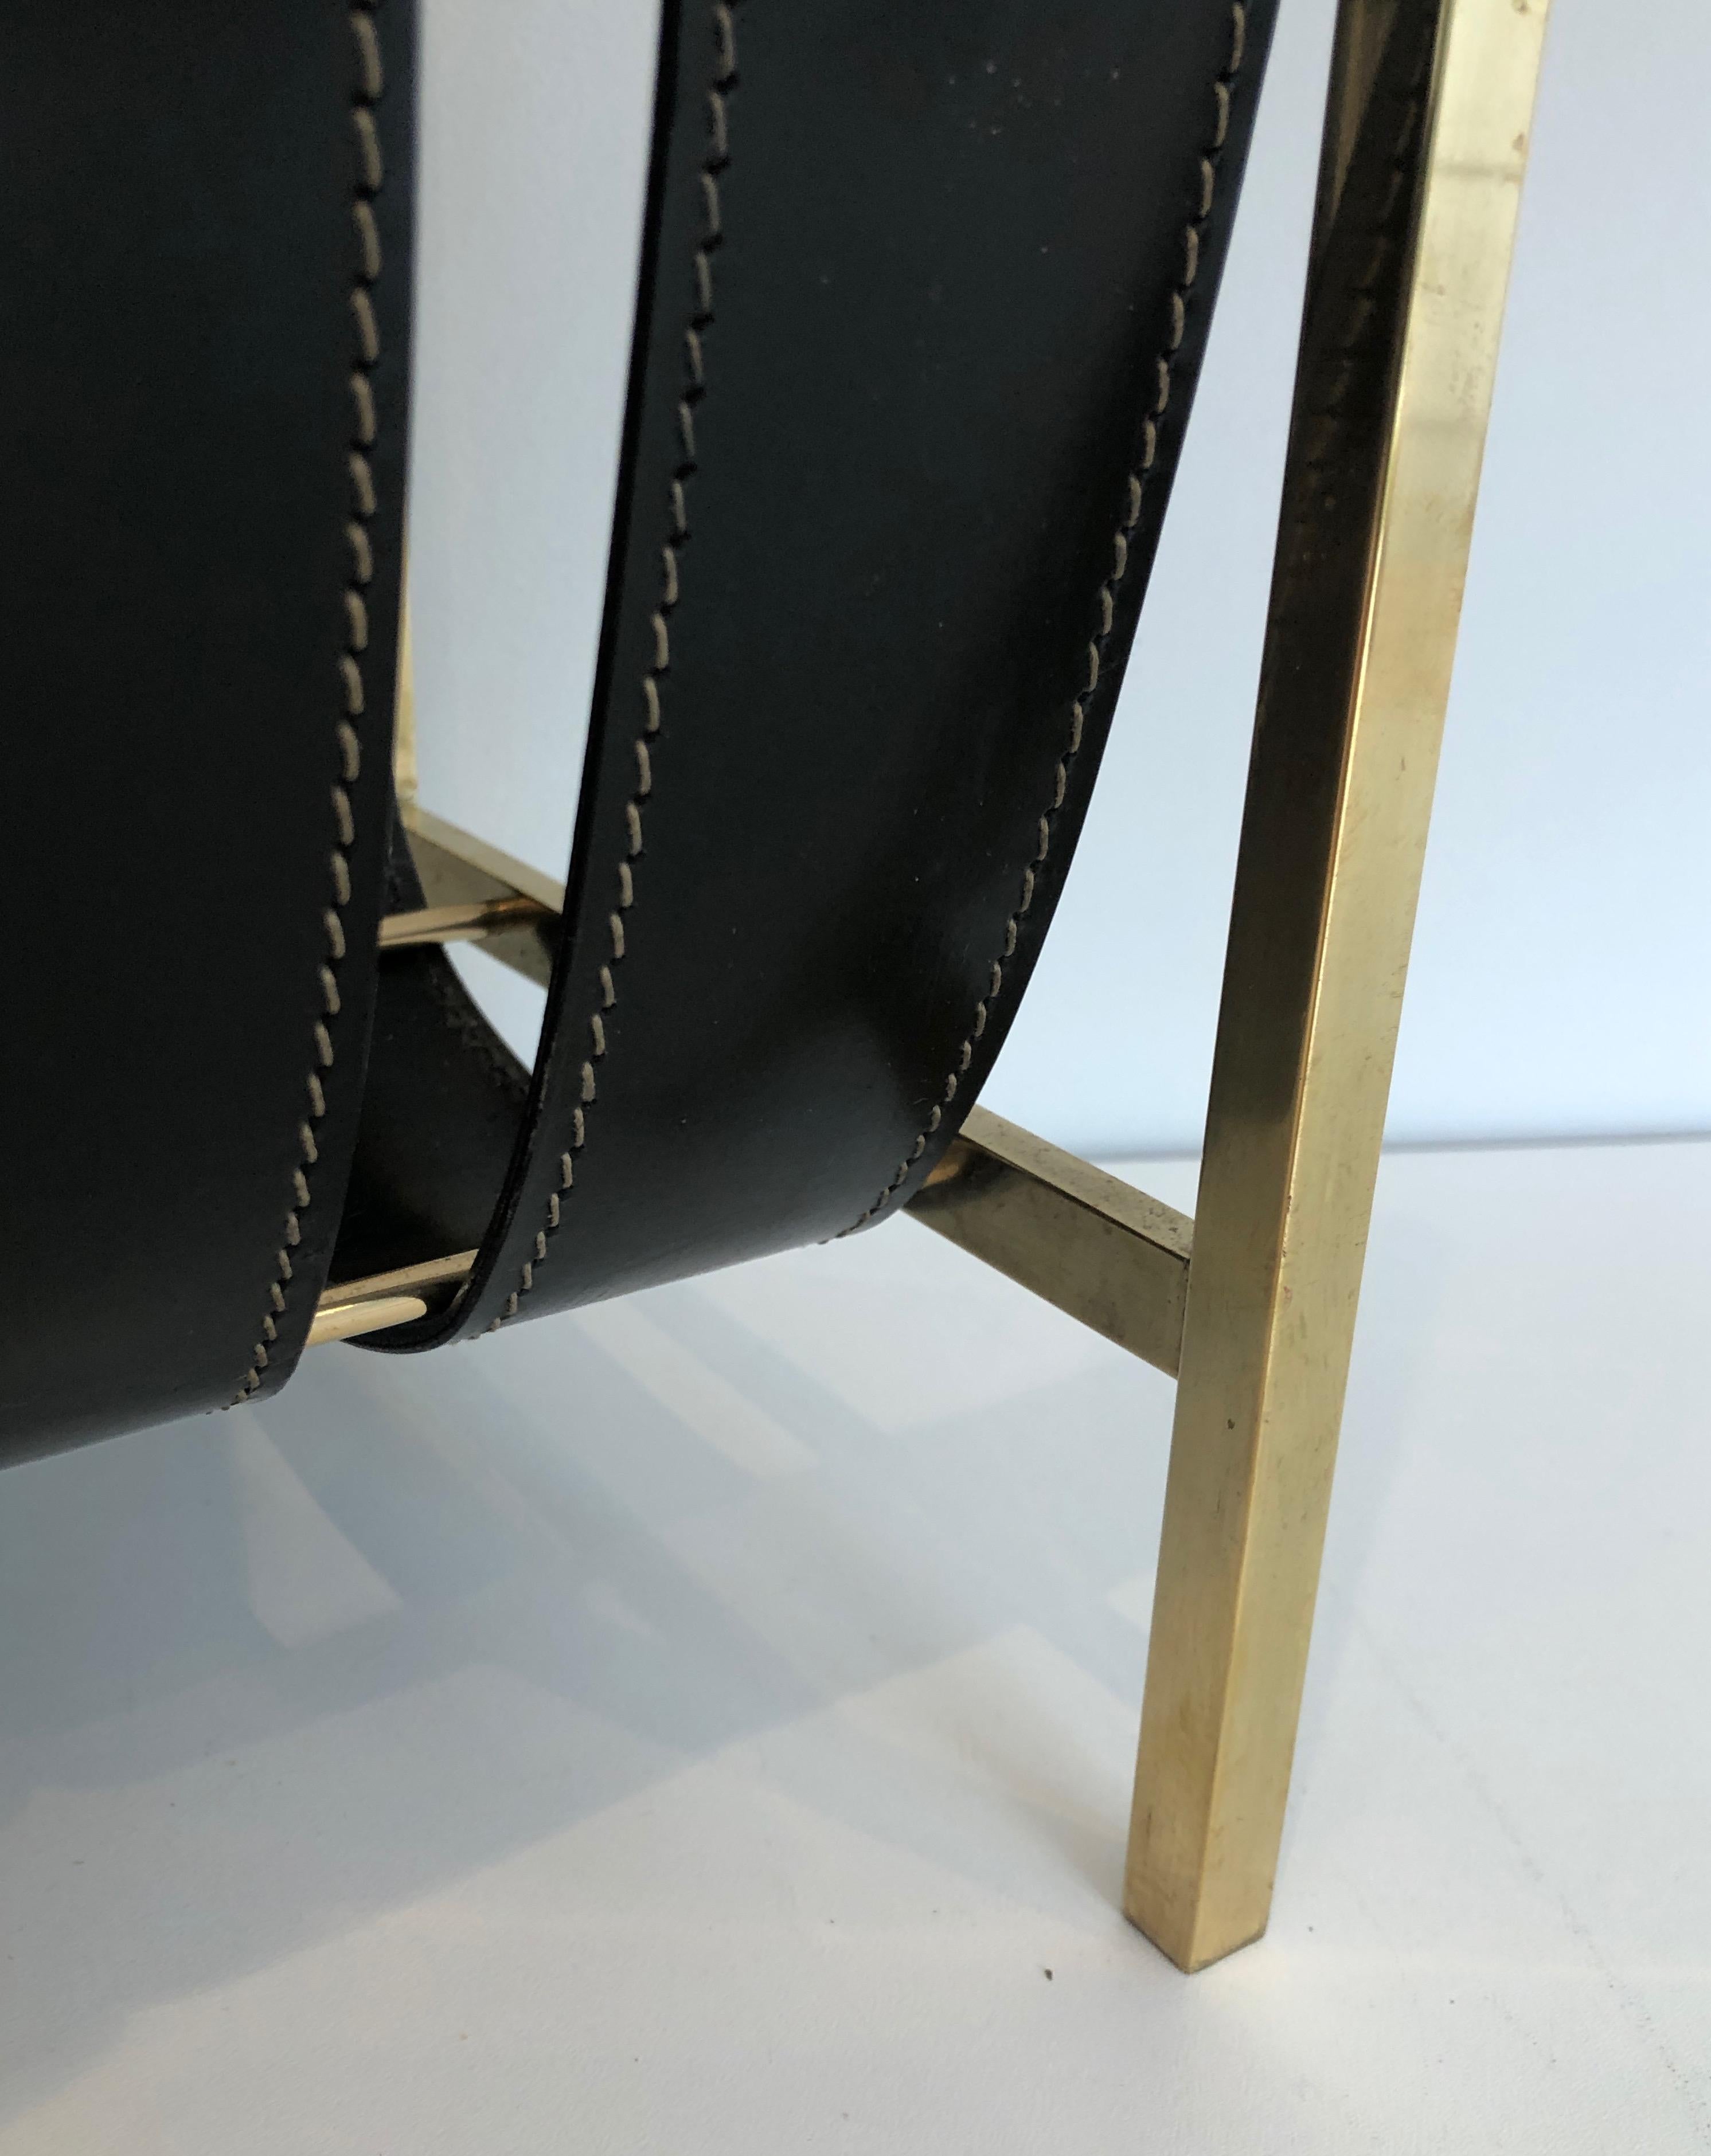 Hand-Bag Brass and Leather Magazine Rack by Jacques Adnet, circa 1940 For Sale 11